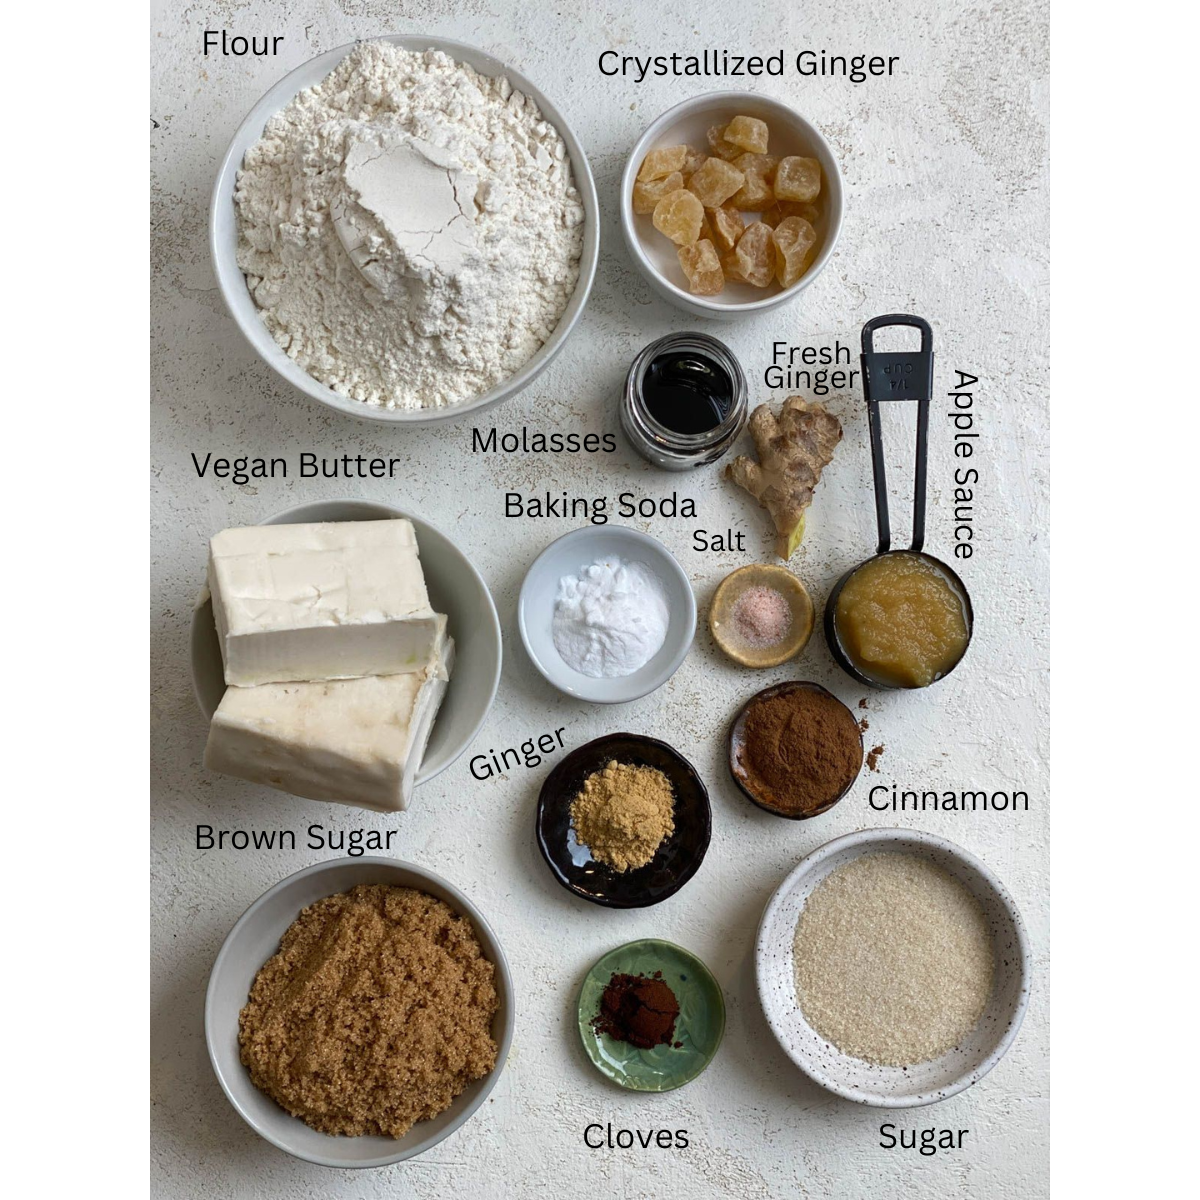 ingredients for Triple Ginger Cookies measured out against a white surface